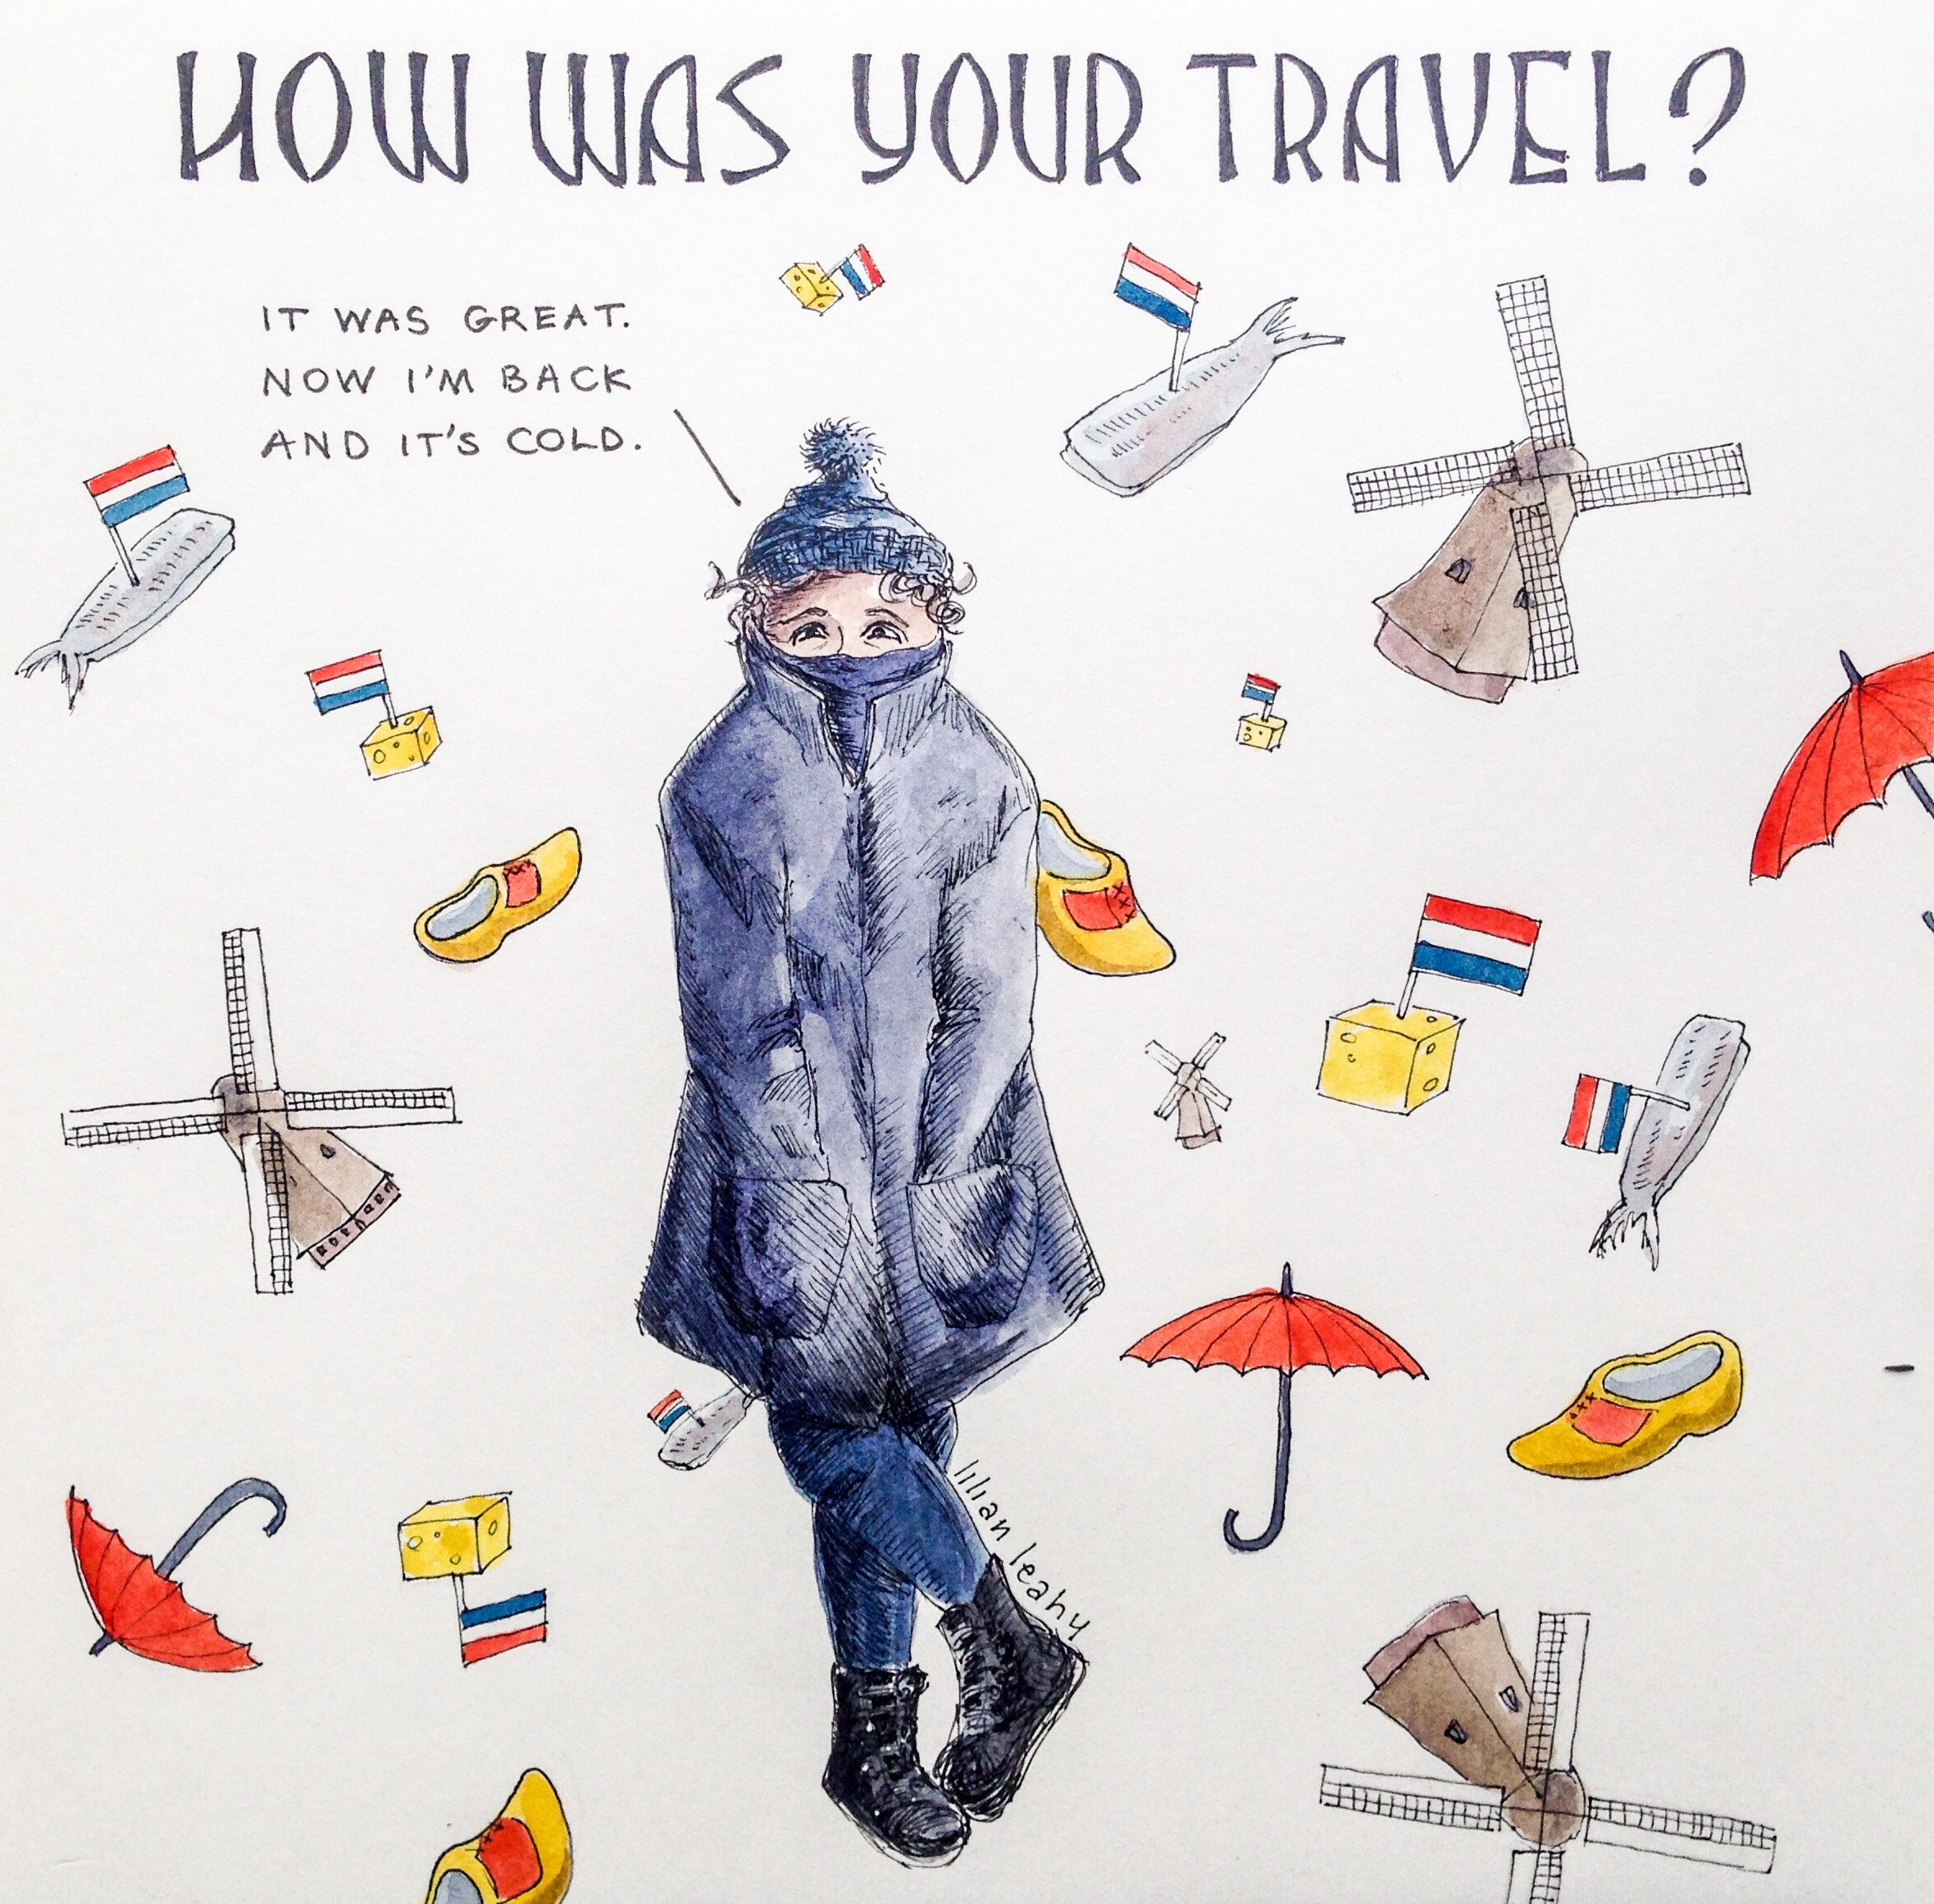 illustration lilian leahy traveling coming home cold dutch holland the netherlands how was your travel ink and watercolor illustrator Rotterdam